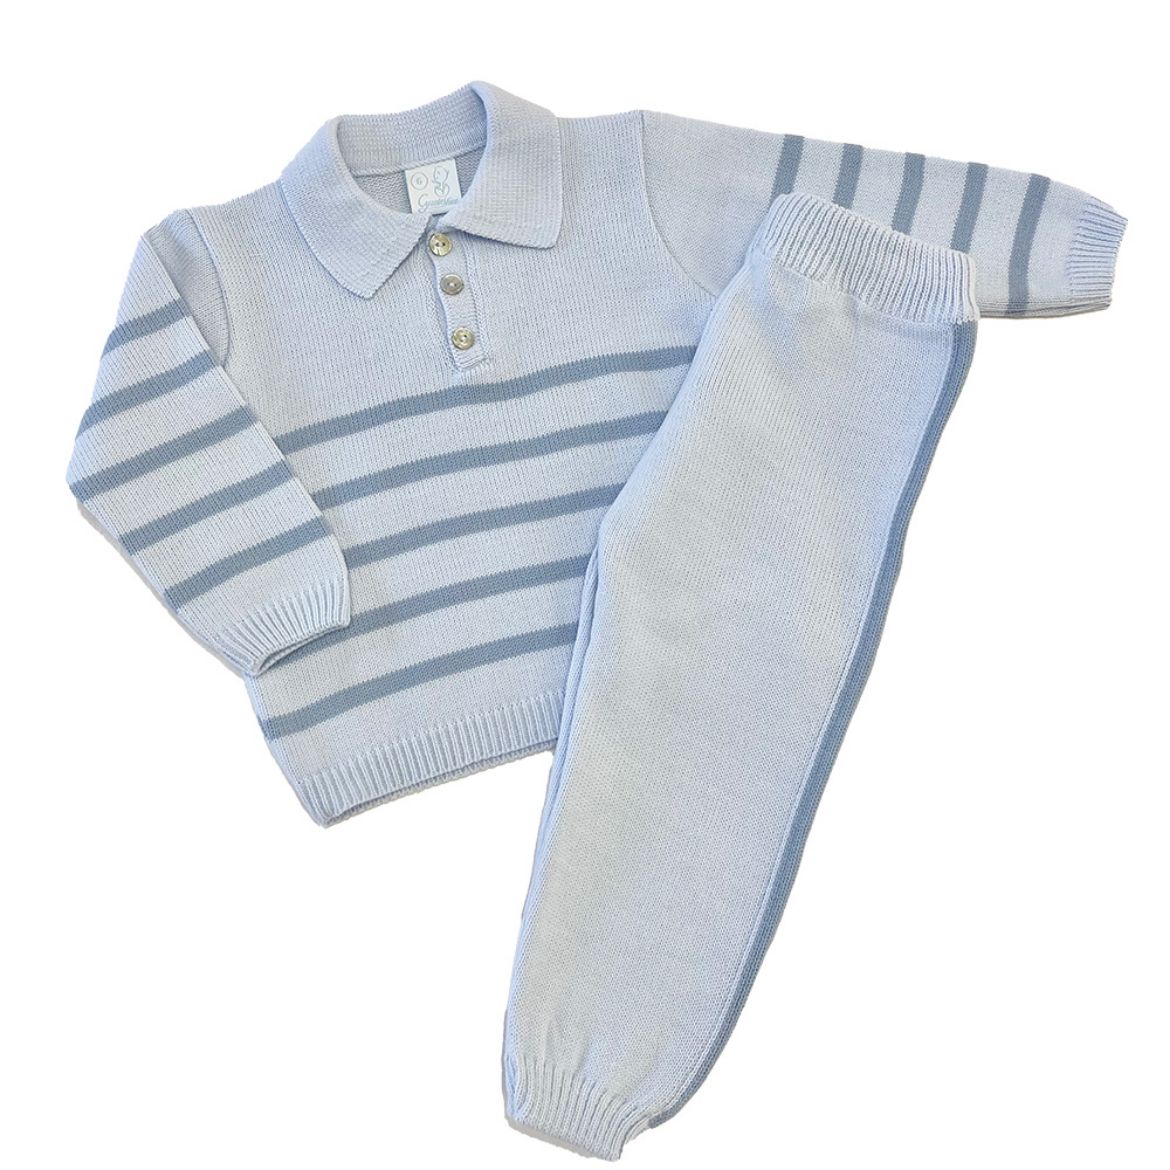 Picture of Granlei Boys Blue Stripe Knitted Set